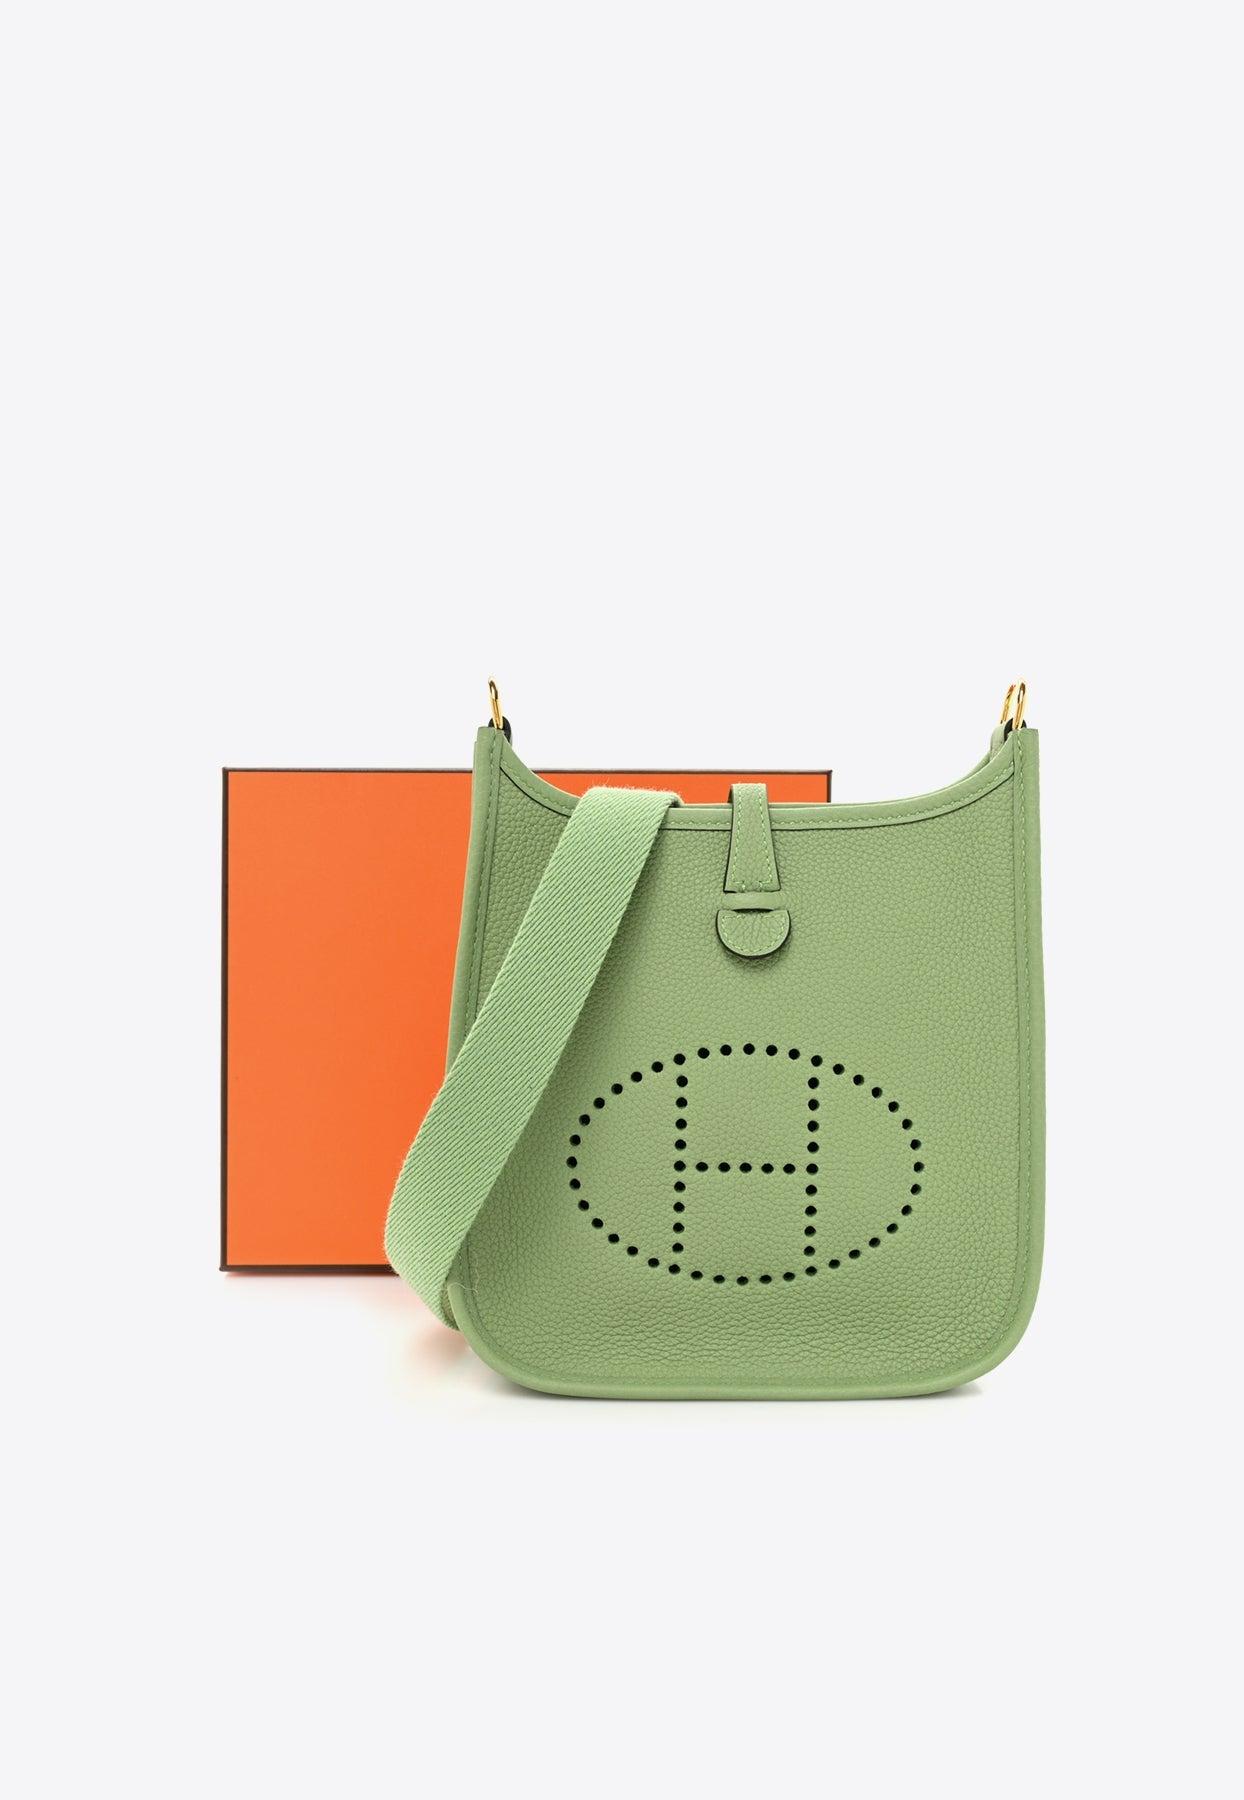 Hermès Evelyne Tpm In Vert Criquet Taurillon Maurice With Gold Hardware in  Green